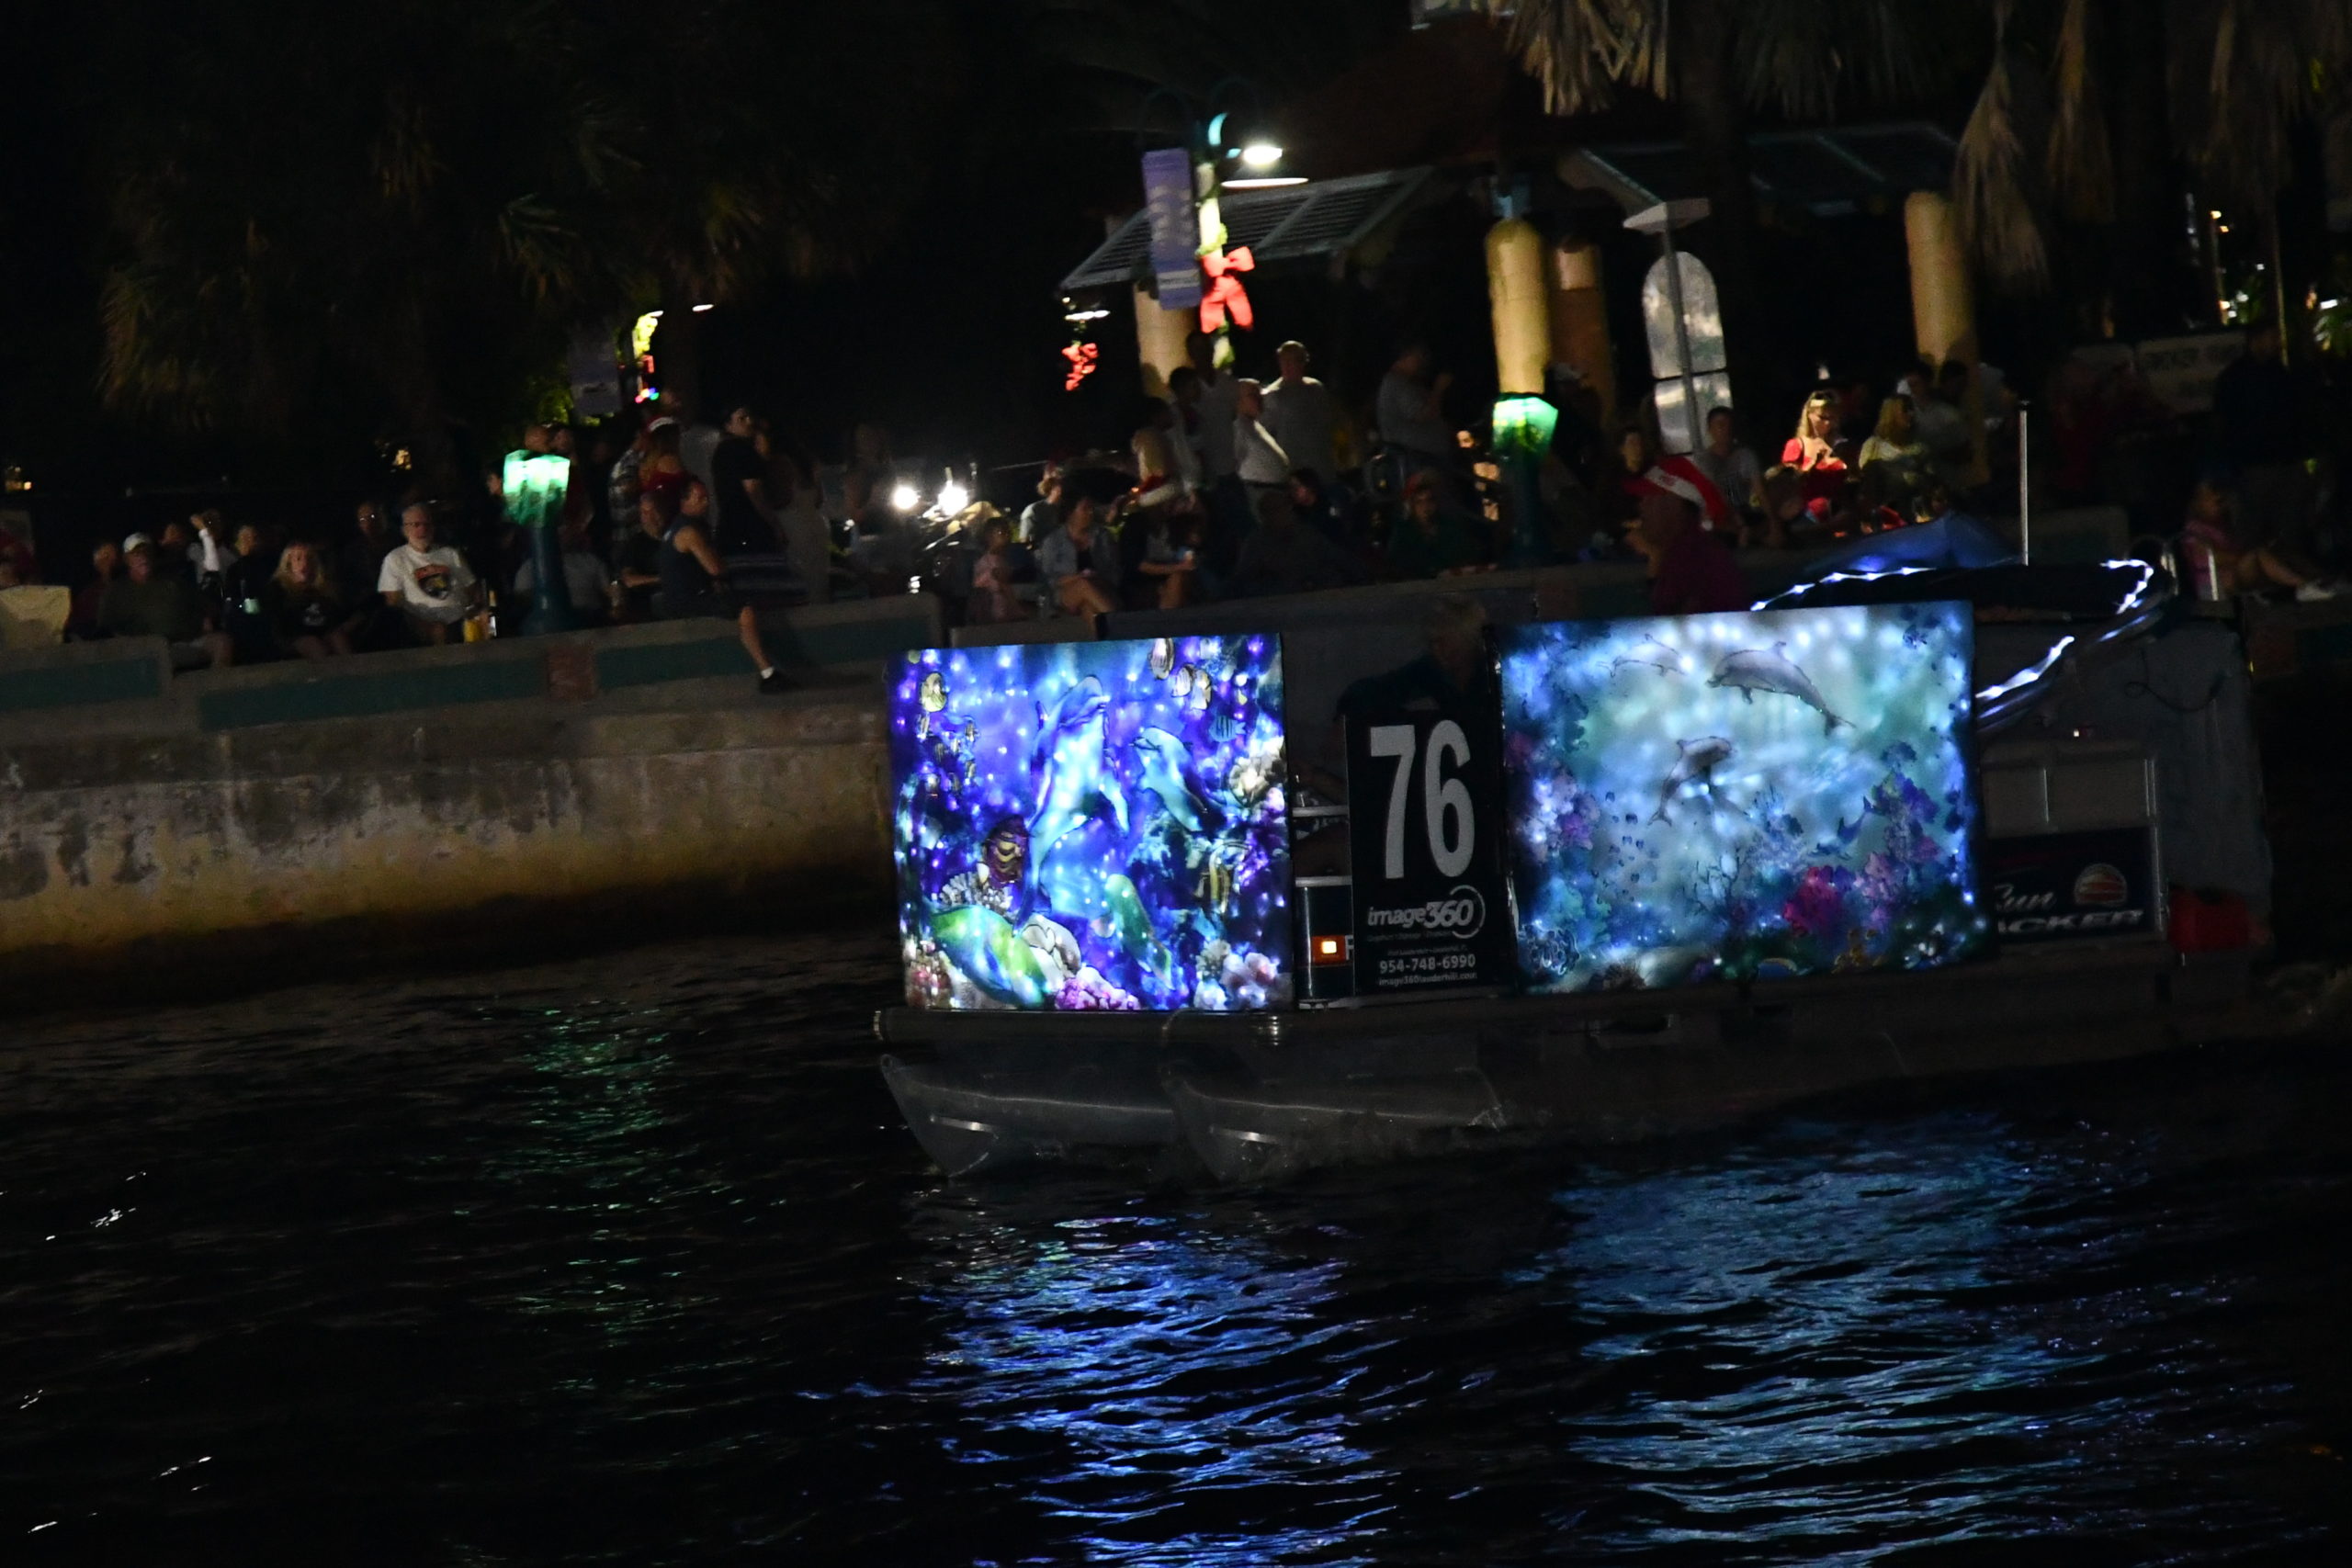 Paris Princess, boat number 76 in the 2022 Winterfest Boat Parade